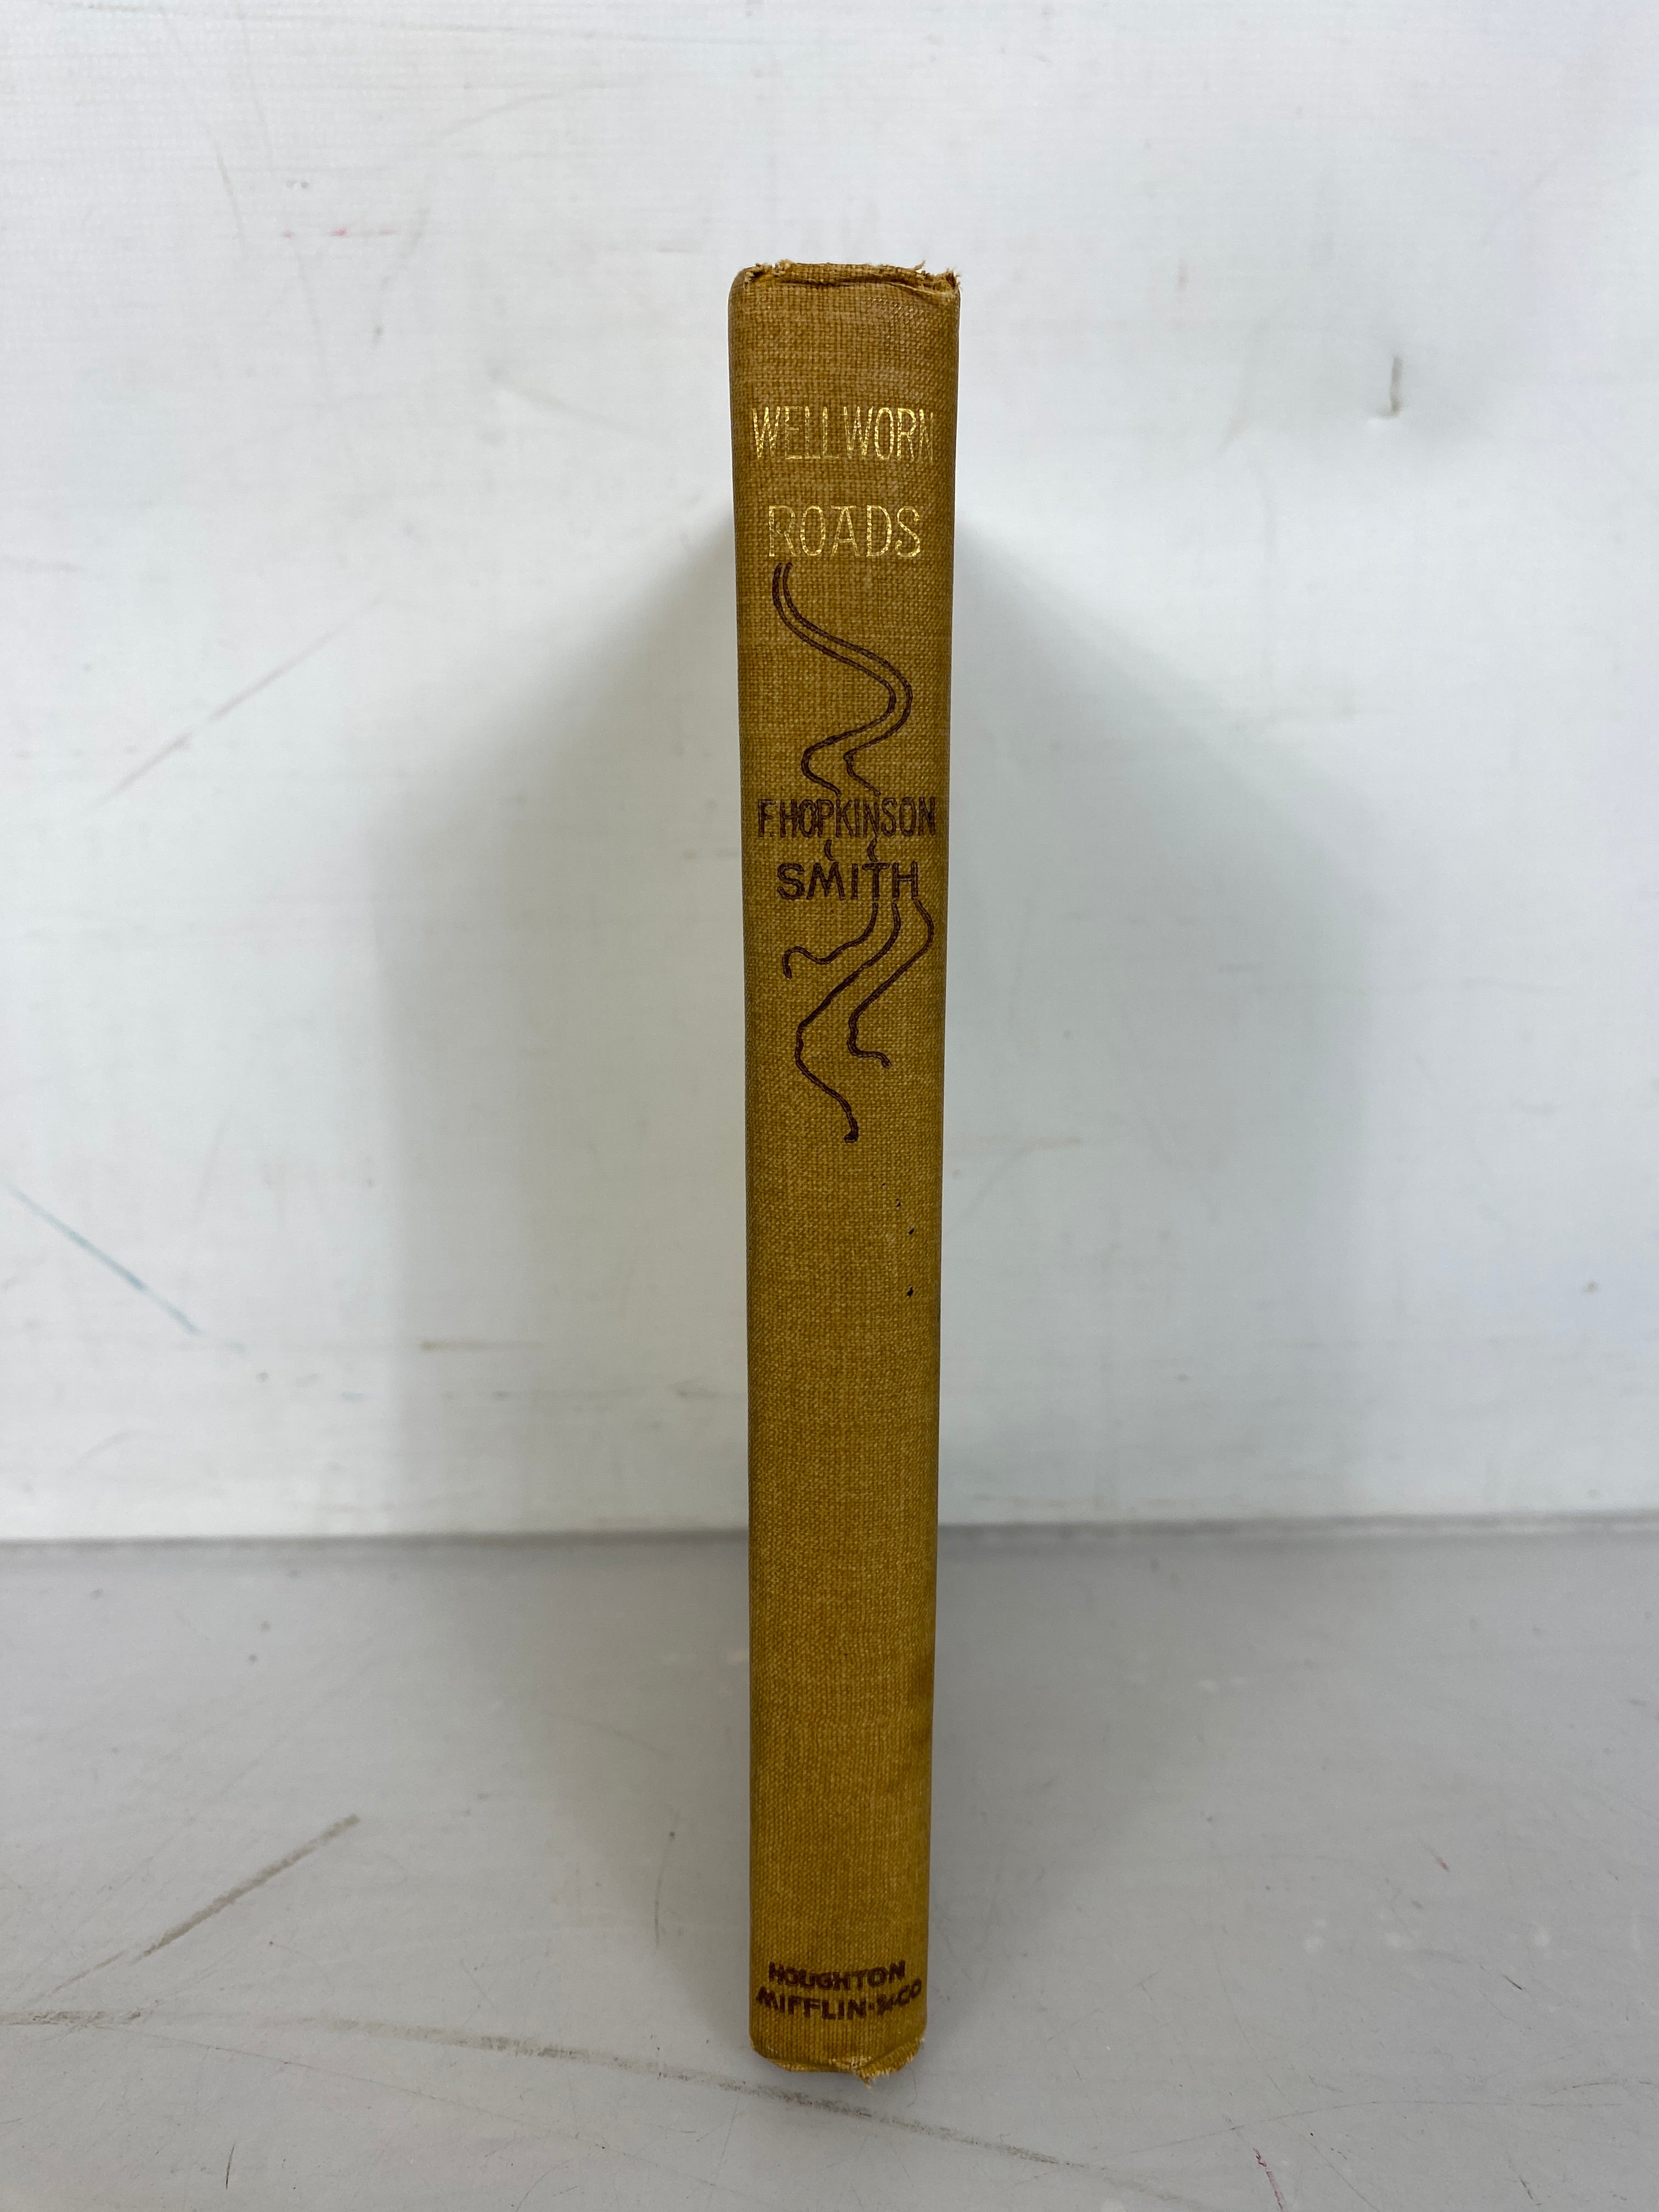 Well-Worn Roads of Spain Holland, and Italy by F. Hopkinson Smith 1900 HC